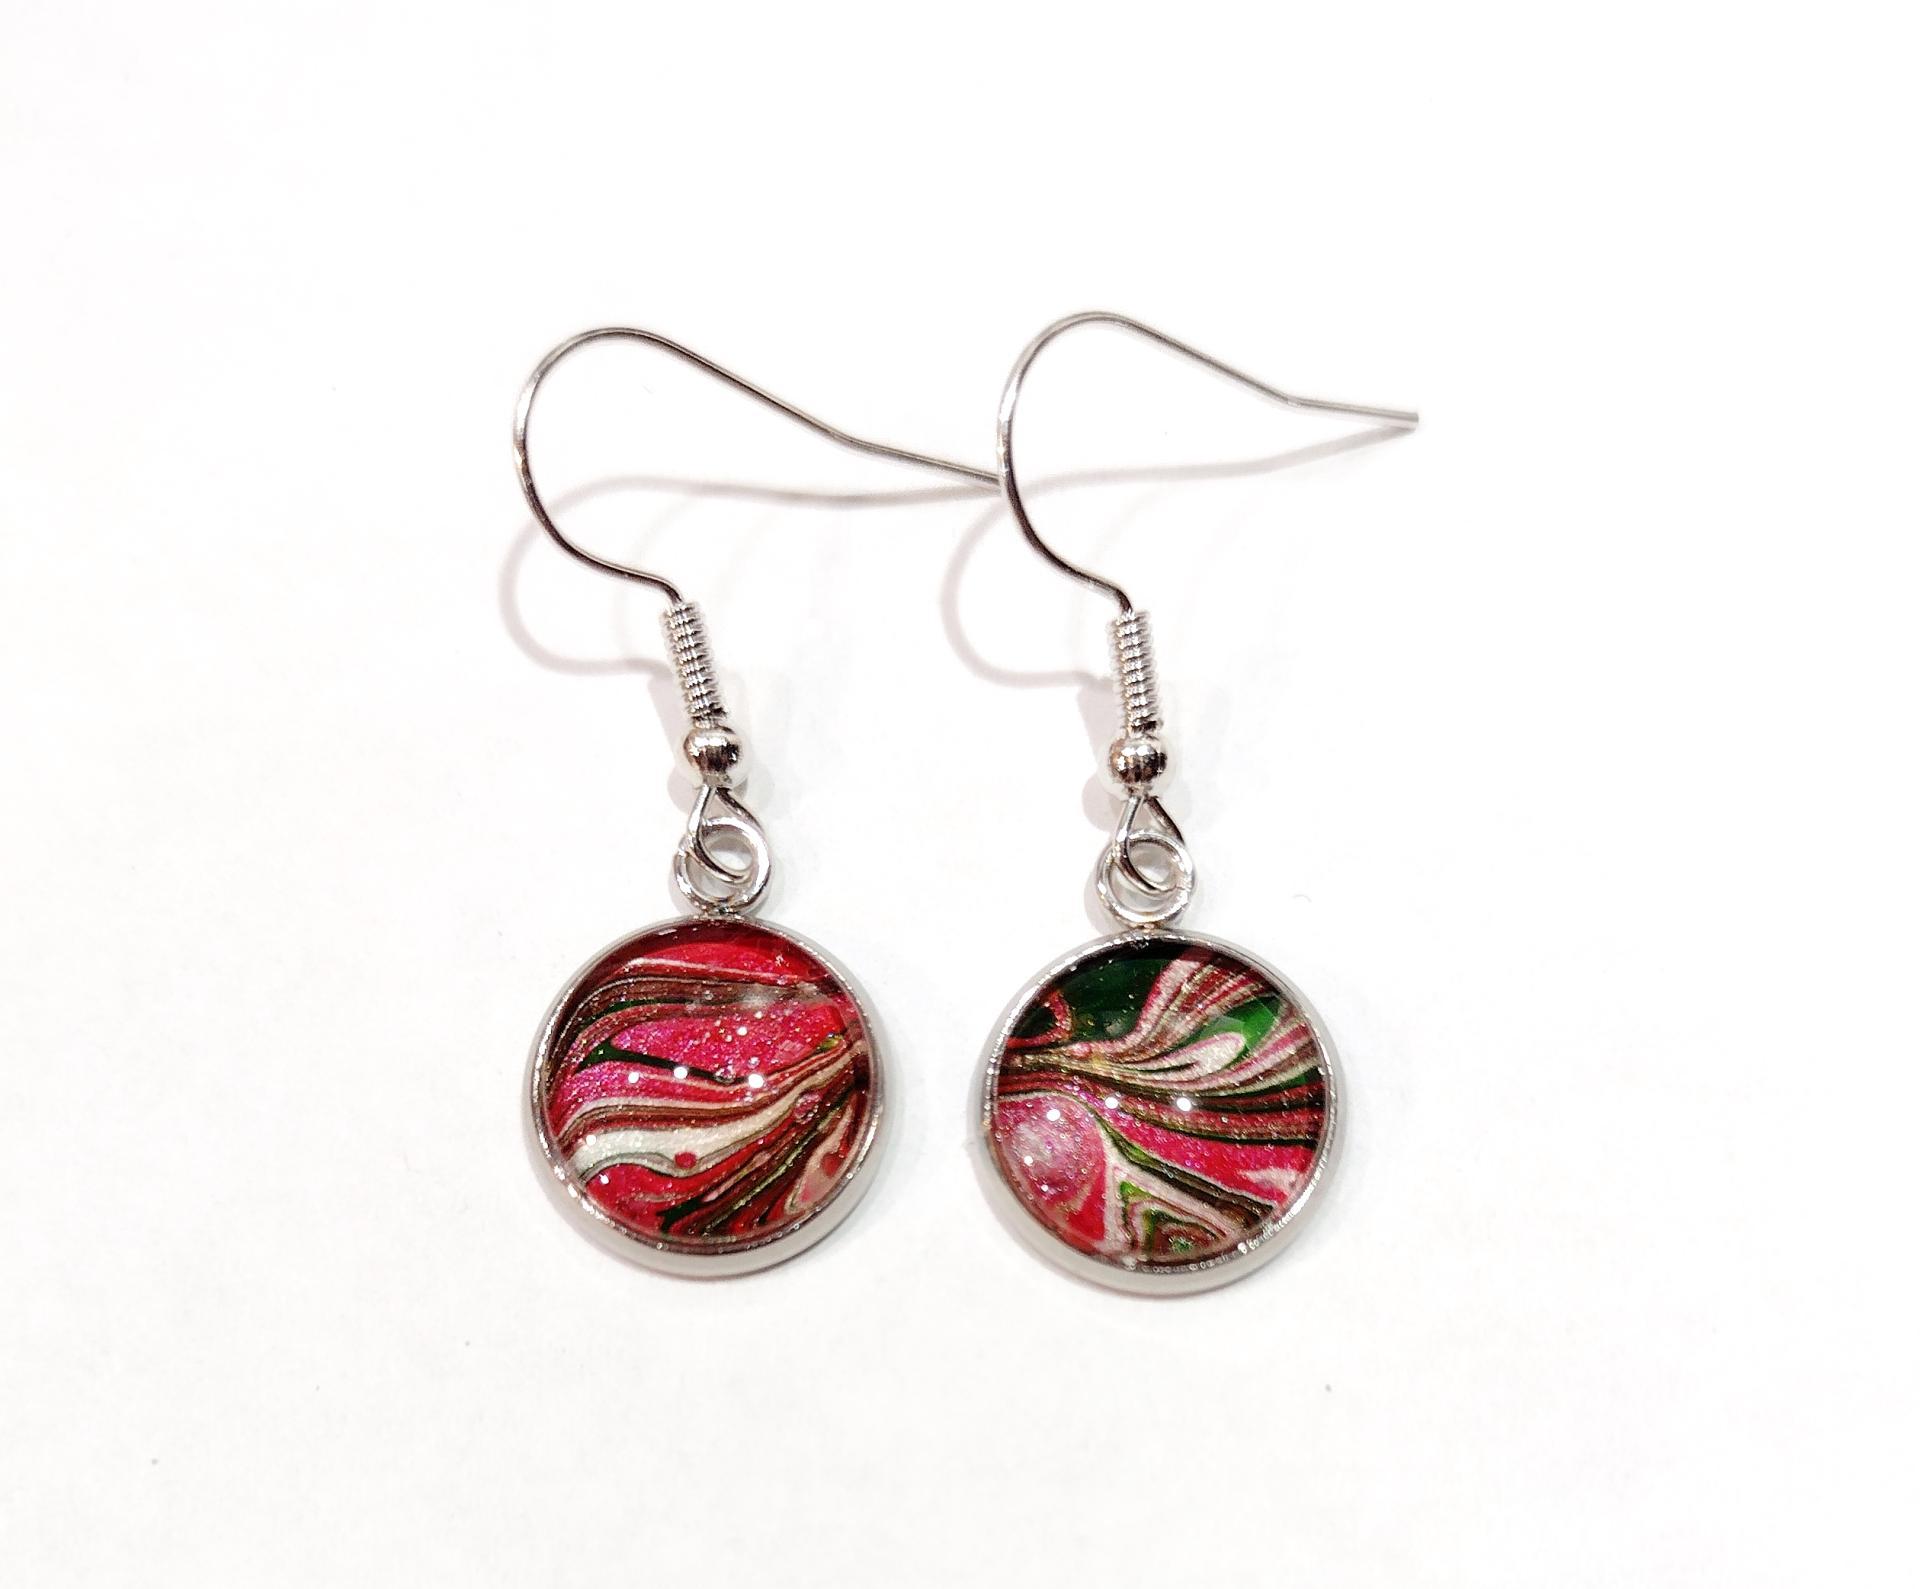 Painted Earrings, Red, Green, and Silver, Holiday Jewelry